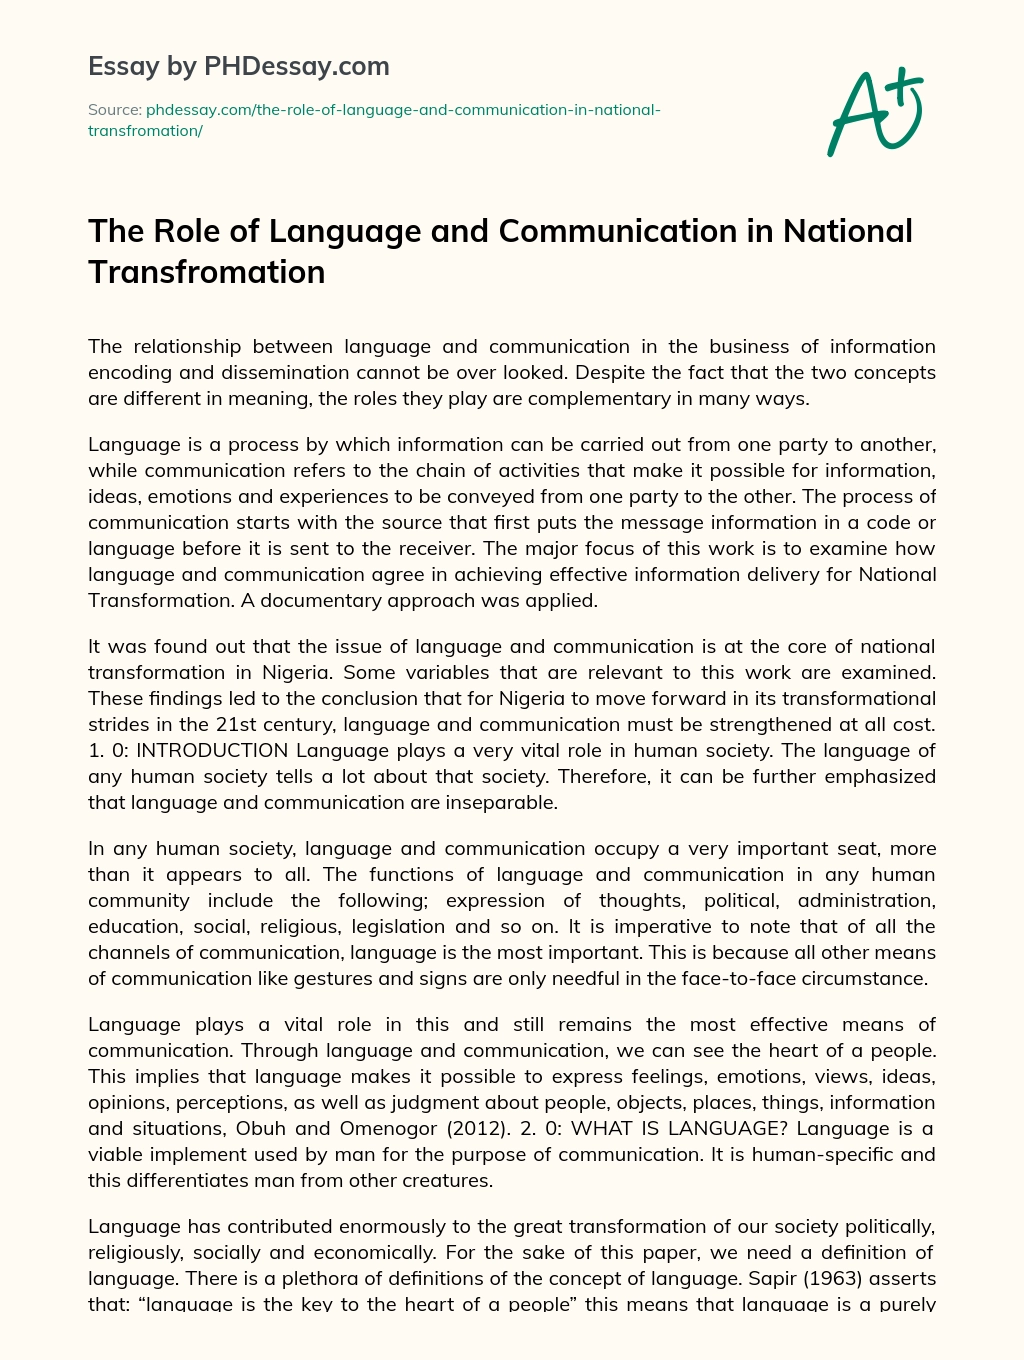 The Role of Language and Communication in National Transfromation essay